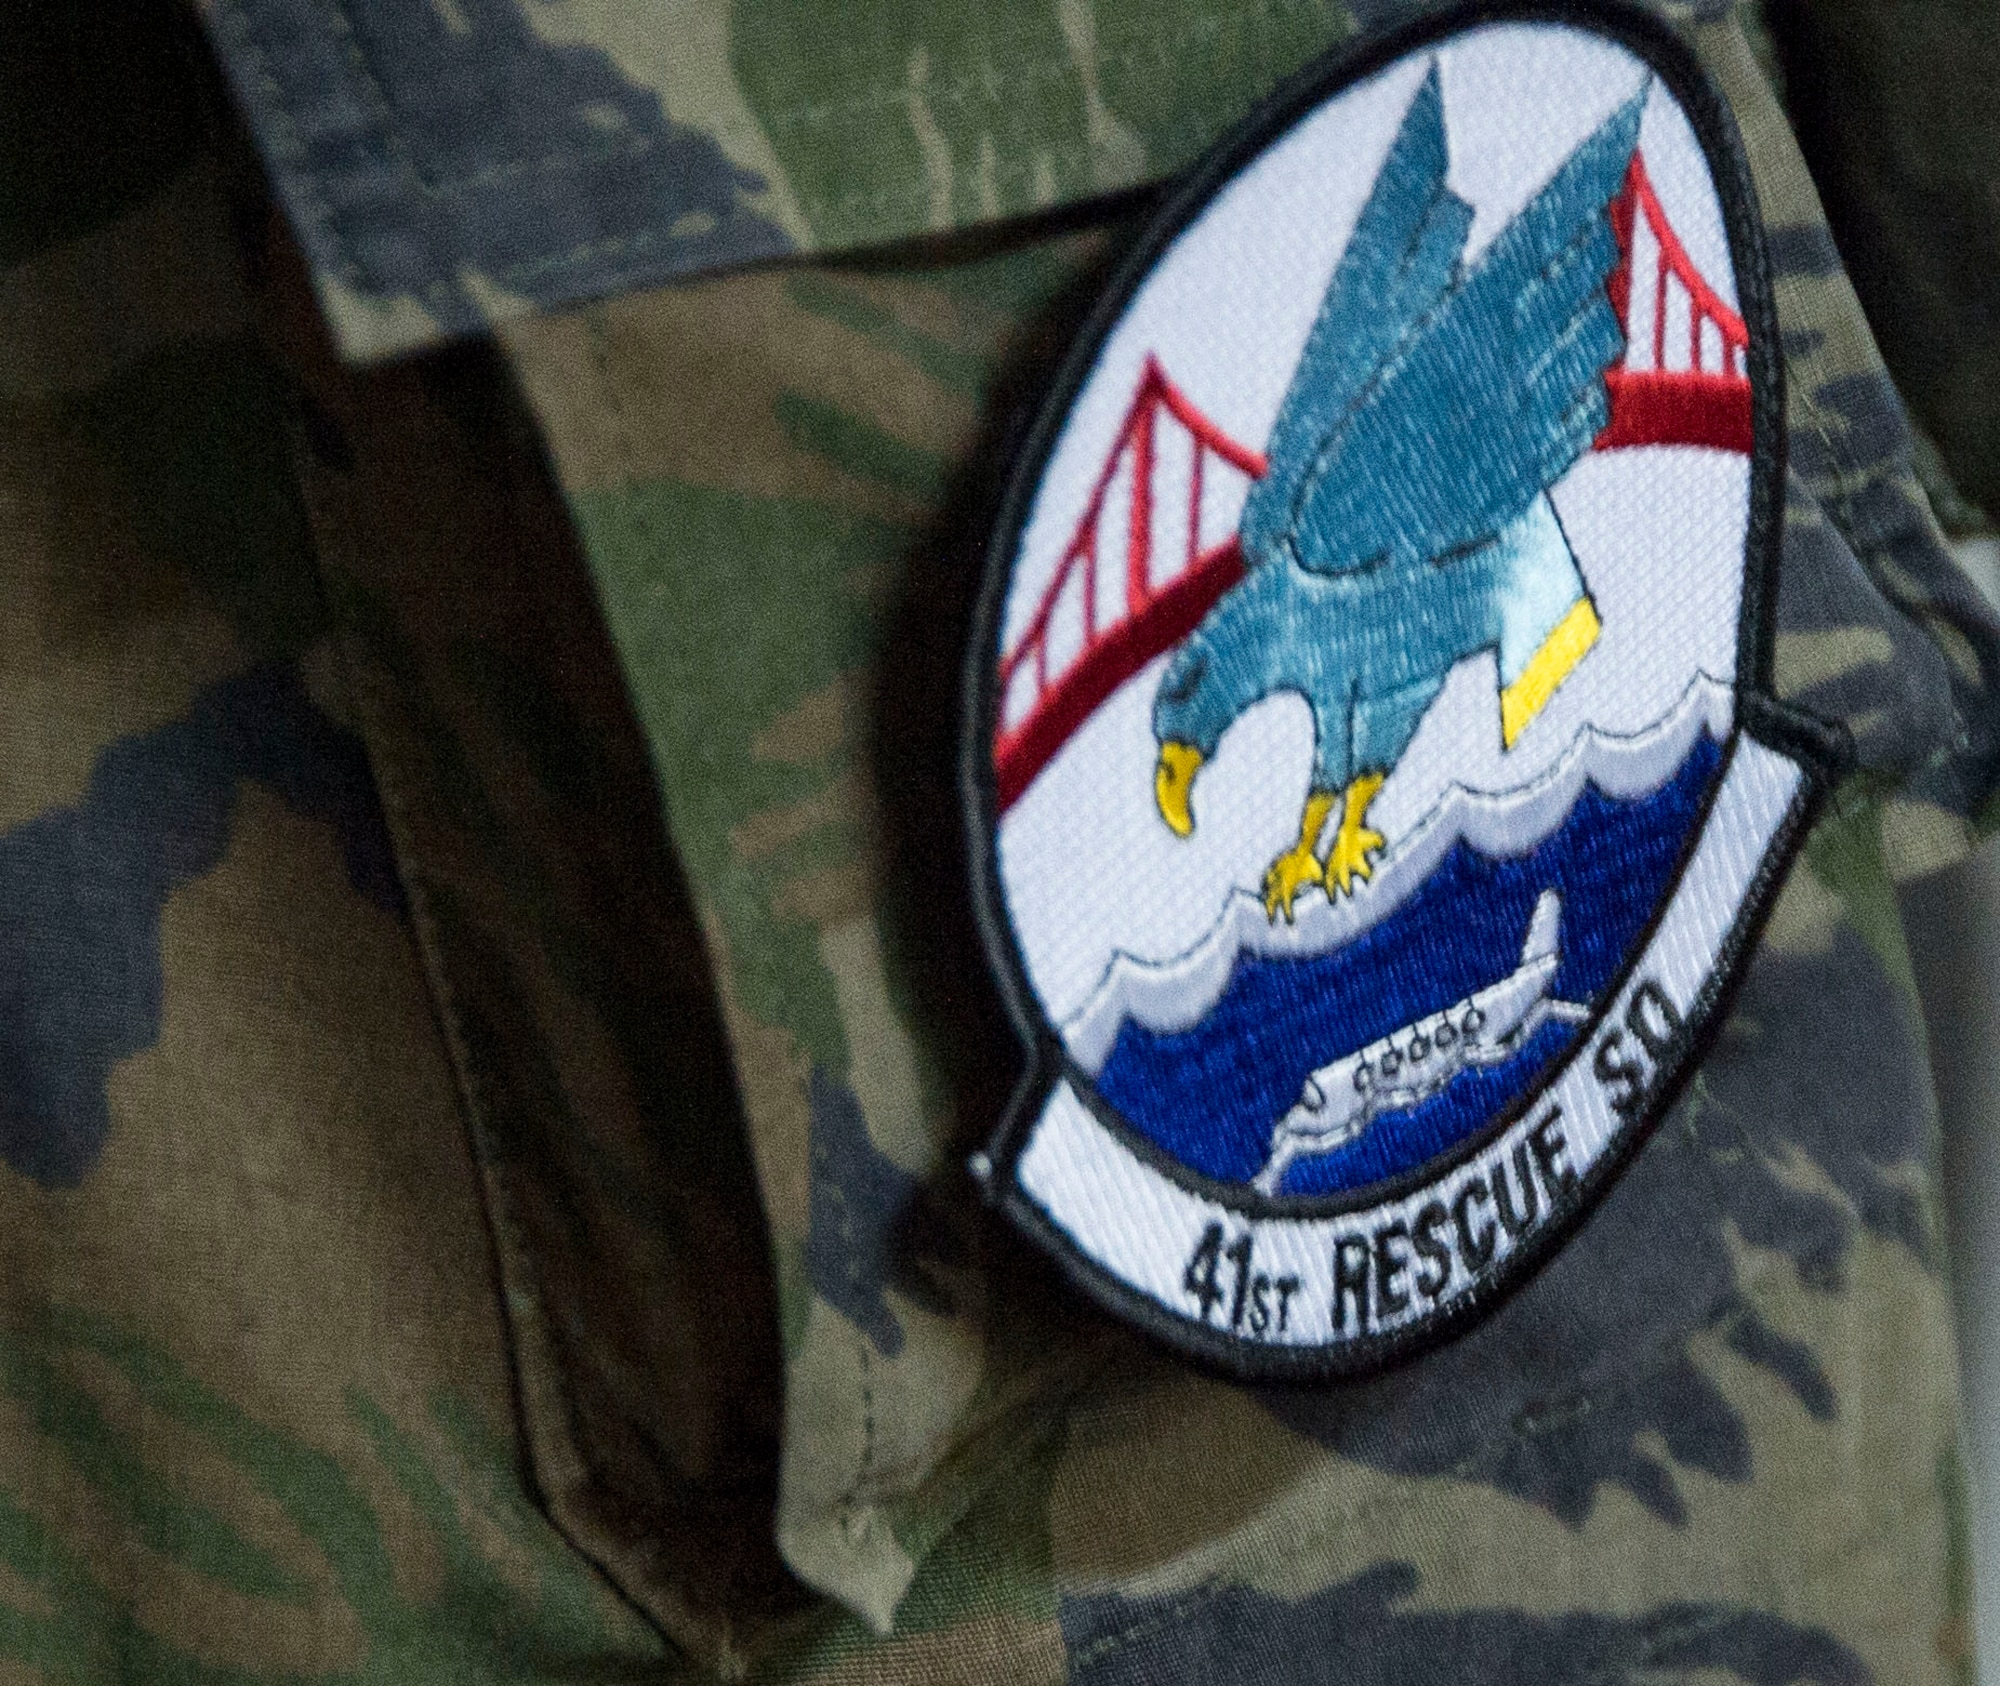 A member of the Brazilian air force wears a patch from the 41st Rescue Squadron after swapping patches with Capt. John Tucciarone, 41st Rescue Squadron HH-60 helicopter pilot, on May 12, 2015 in Campo Grande, Brazil. During the week long exchange Tucciarone spoke to the capabilities of the HH-60 Pavehawk helicopter and its role in Search and Rescue. (U.S. Air Force photo by Staff Sgt. Adam Grant/Released)